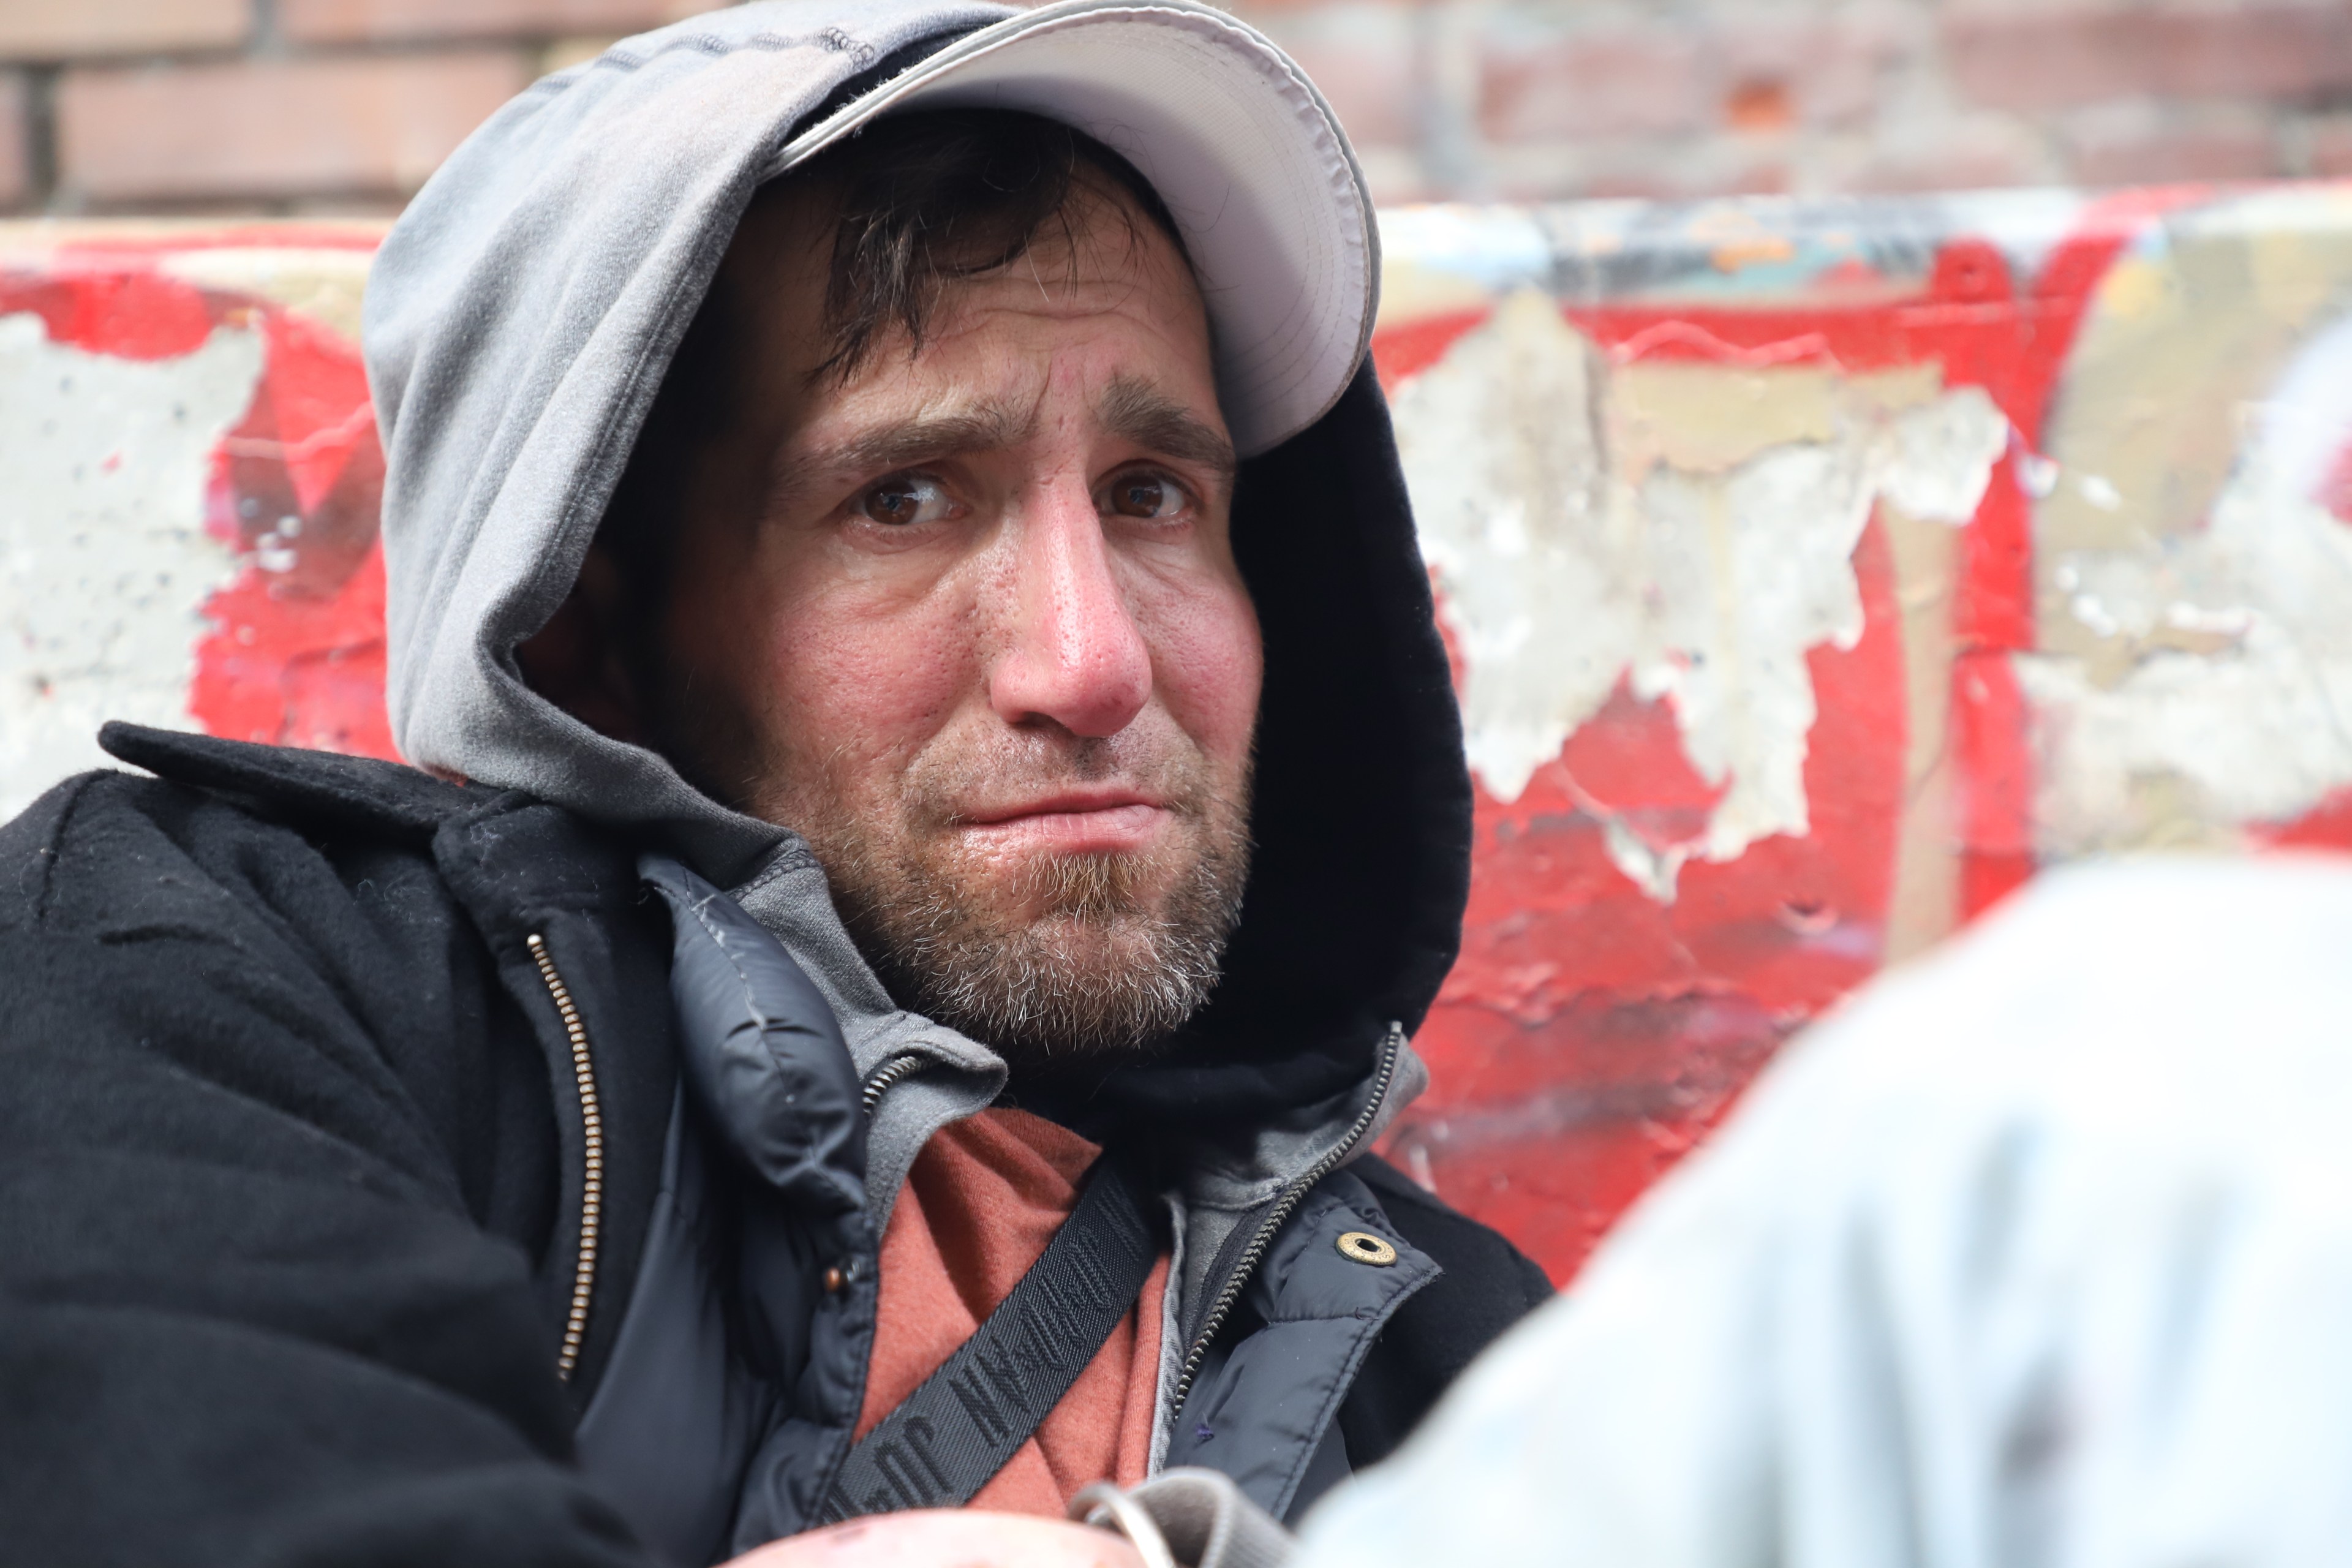 A man in layers with a hood, a beard, and a concerned expression sits before a peeling red wall.